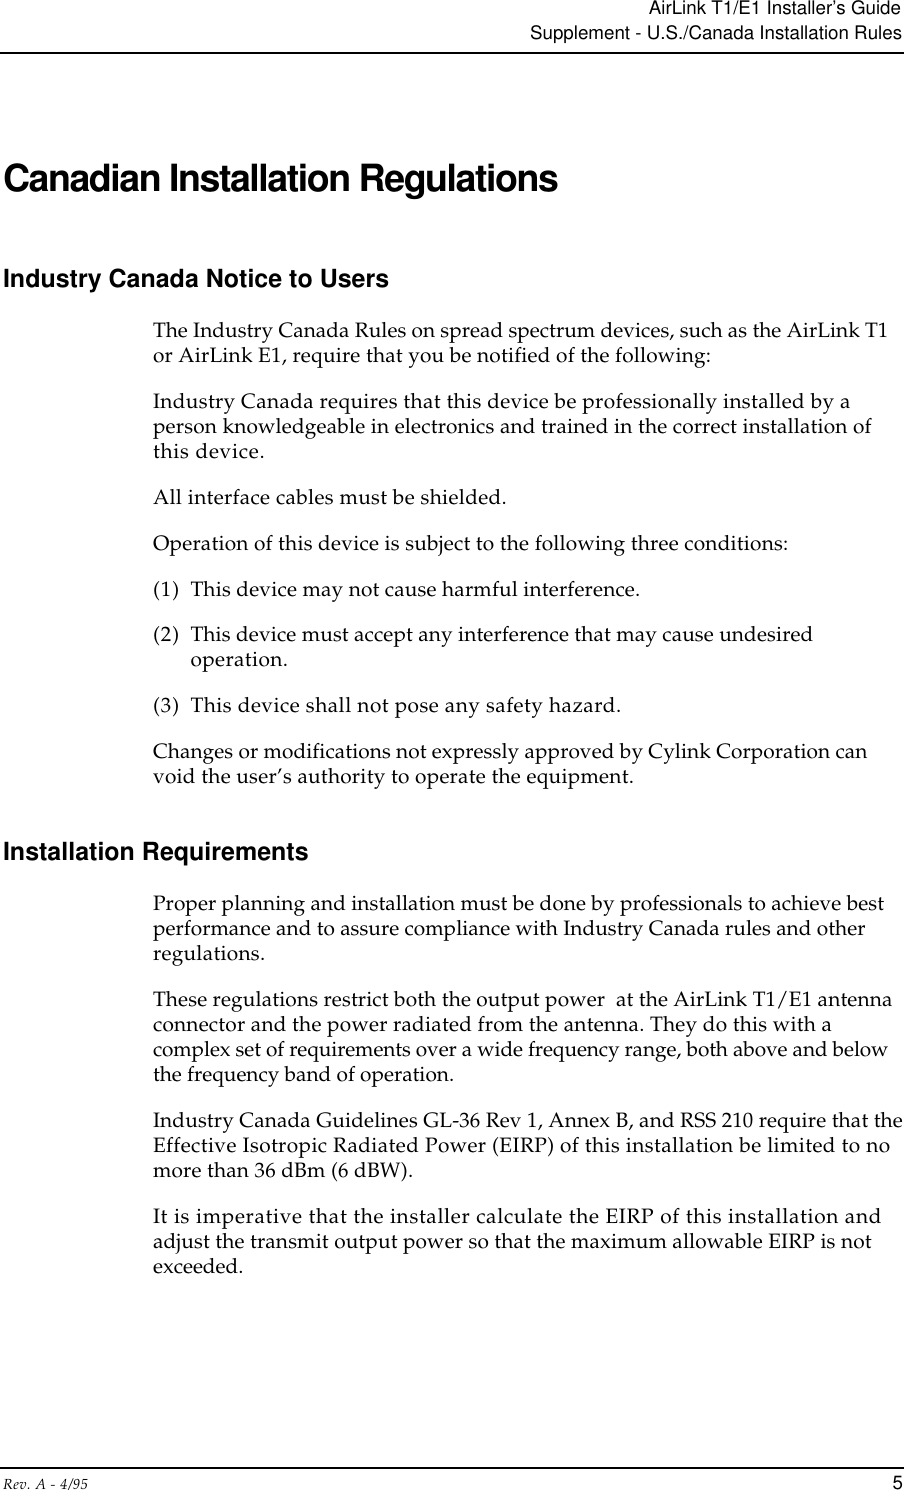 AirLink T1/E1 Installer’s GuideSupplement - U.S./Canada Installation RulesRev. A - 4/95 5Canadian Installation RegulationsIndustry Canada Notice to UsersThe Industry Canada Rules on spread spectrum devices, such as the AirLink T1or AirLink E1, require that you be notified of the following:Industry Canada requires that this device be professionally installed by aperson knowledgeable in electronics and trained in the correct installation ofthis device.All interface cables must be shielded.Operation of this device is subject to the following three conditions:(1) This device may not cause harmful interference.(2) This device must accept any interference that may cause undesiredoperation.(3) This device shall not pose any safety hazard.Changes or modifications not expressly approved by Cylink Corporation canvoid the user’s authority to operate the equipment.Installation RequirementsProper planning and installation must be done by professionals to achieve bestperformance and to assure compliance with Industry Canada rules and otherregulations.These regulations restrict both the output power  at the AirLink T1/E1 antennaconnector and the power radiated from the antenna. They do this with acomplex set of requirements over a wide frequency range, both above and belowthe frequency band of operation.Industry Canada Guidelines GL-36 Rev 1, Annex B, and RSS 210 require that theEffective Isotropic Radiated Power (EIRP) of this installation be limited to nomore than 36 dBm (6 dBW).It is imperative that the installer calculate the EIRP of this installation andadjust the transmit output power so that the maximum allowable EIRP is notexceeded.